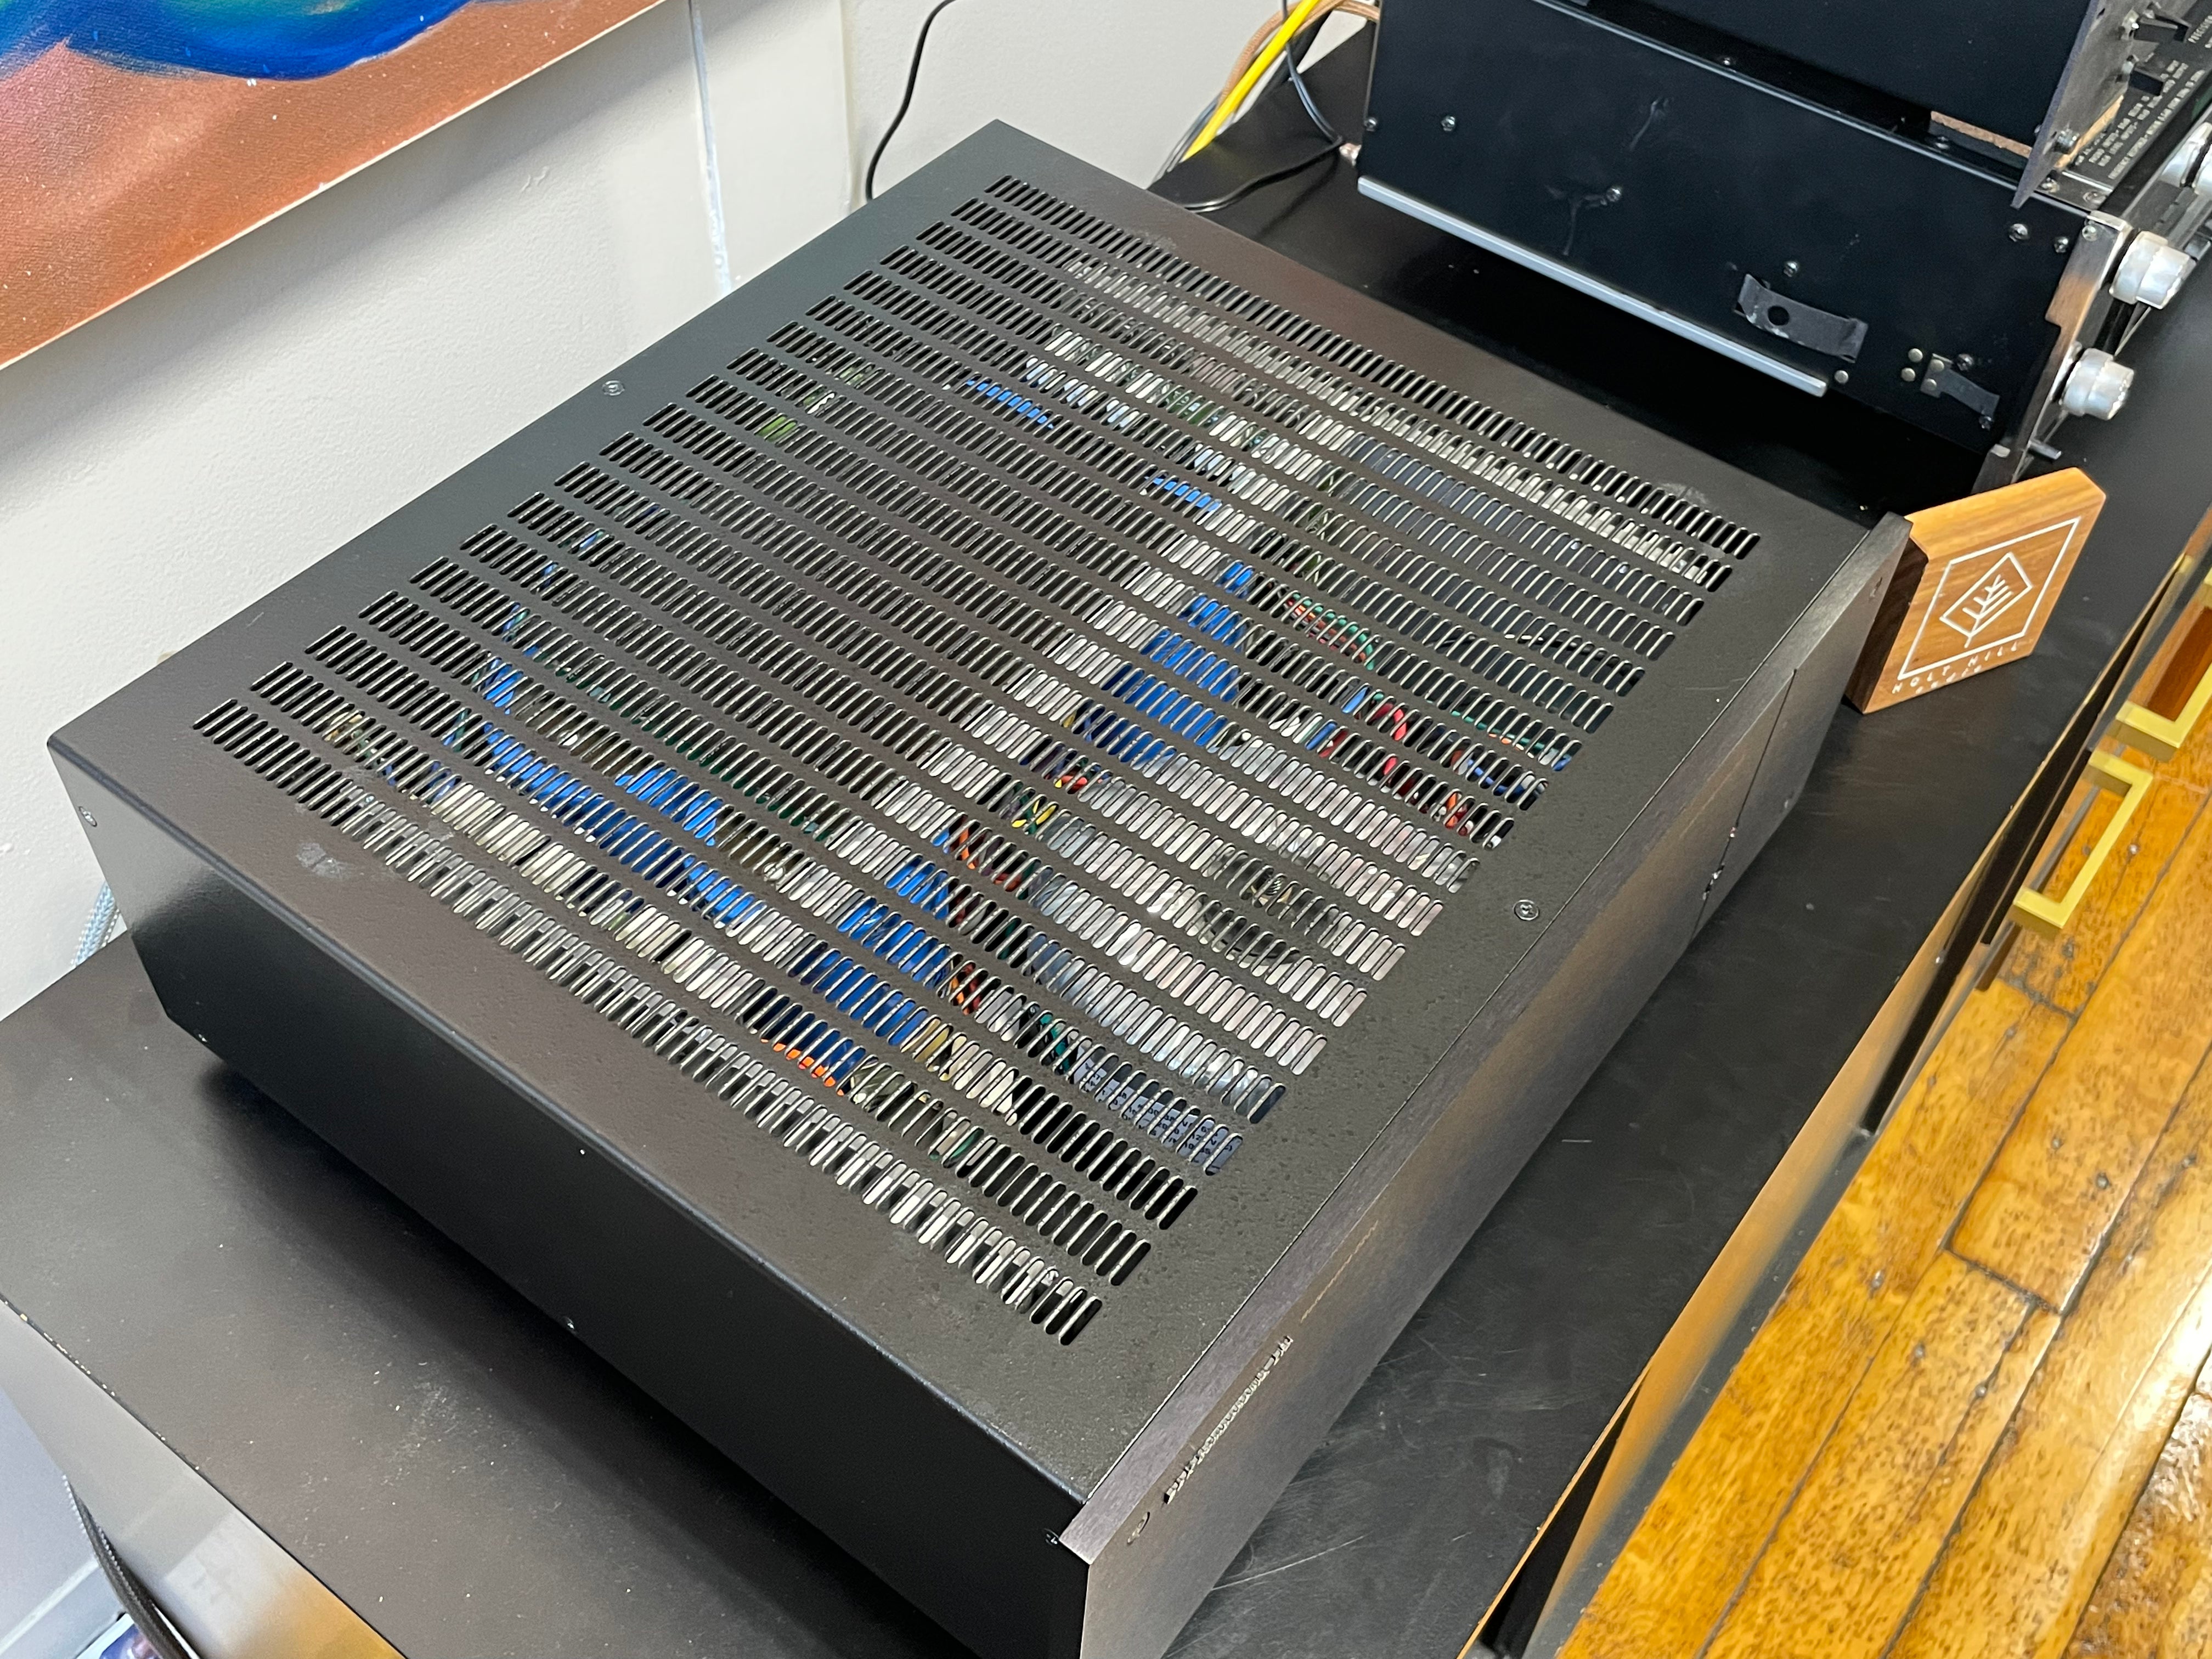 B&K Reference 2220 Power Amplifier - SOLD